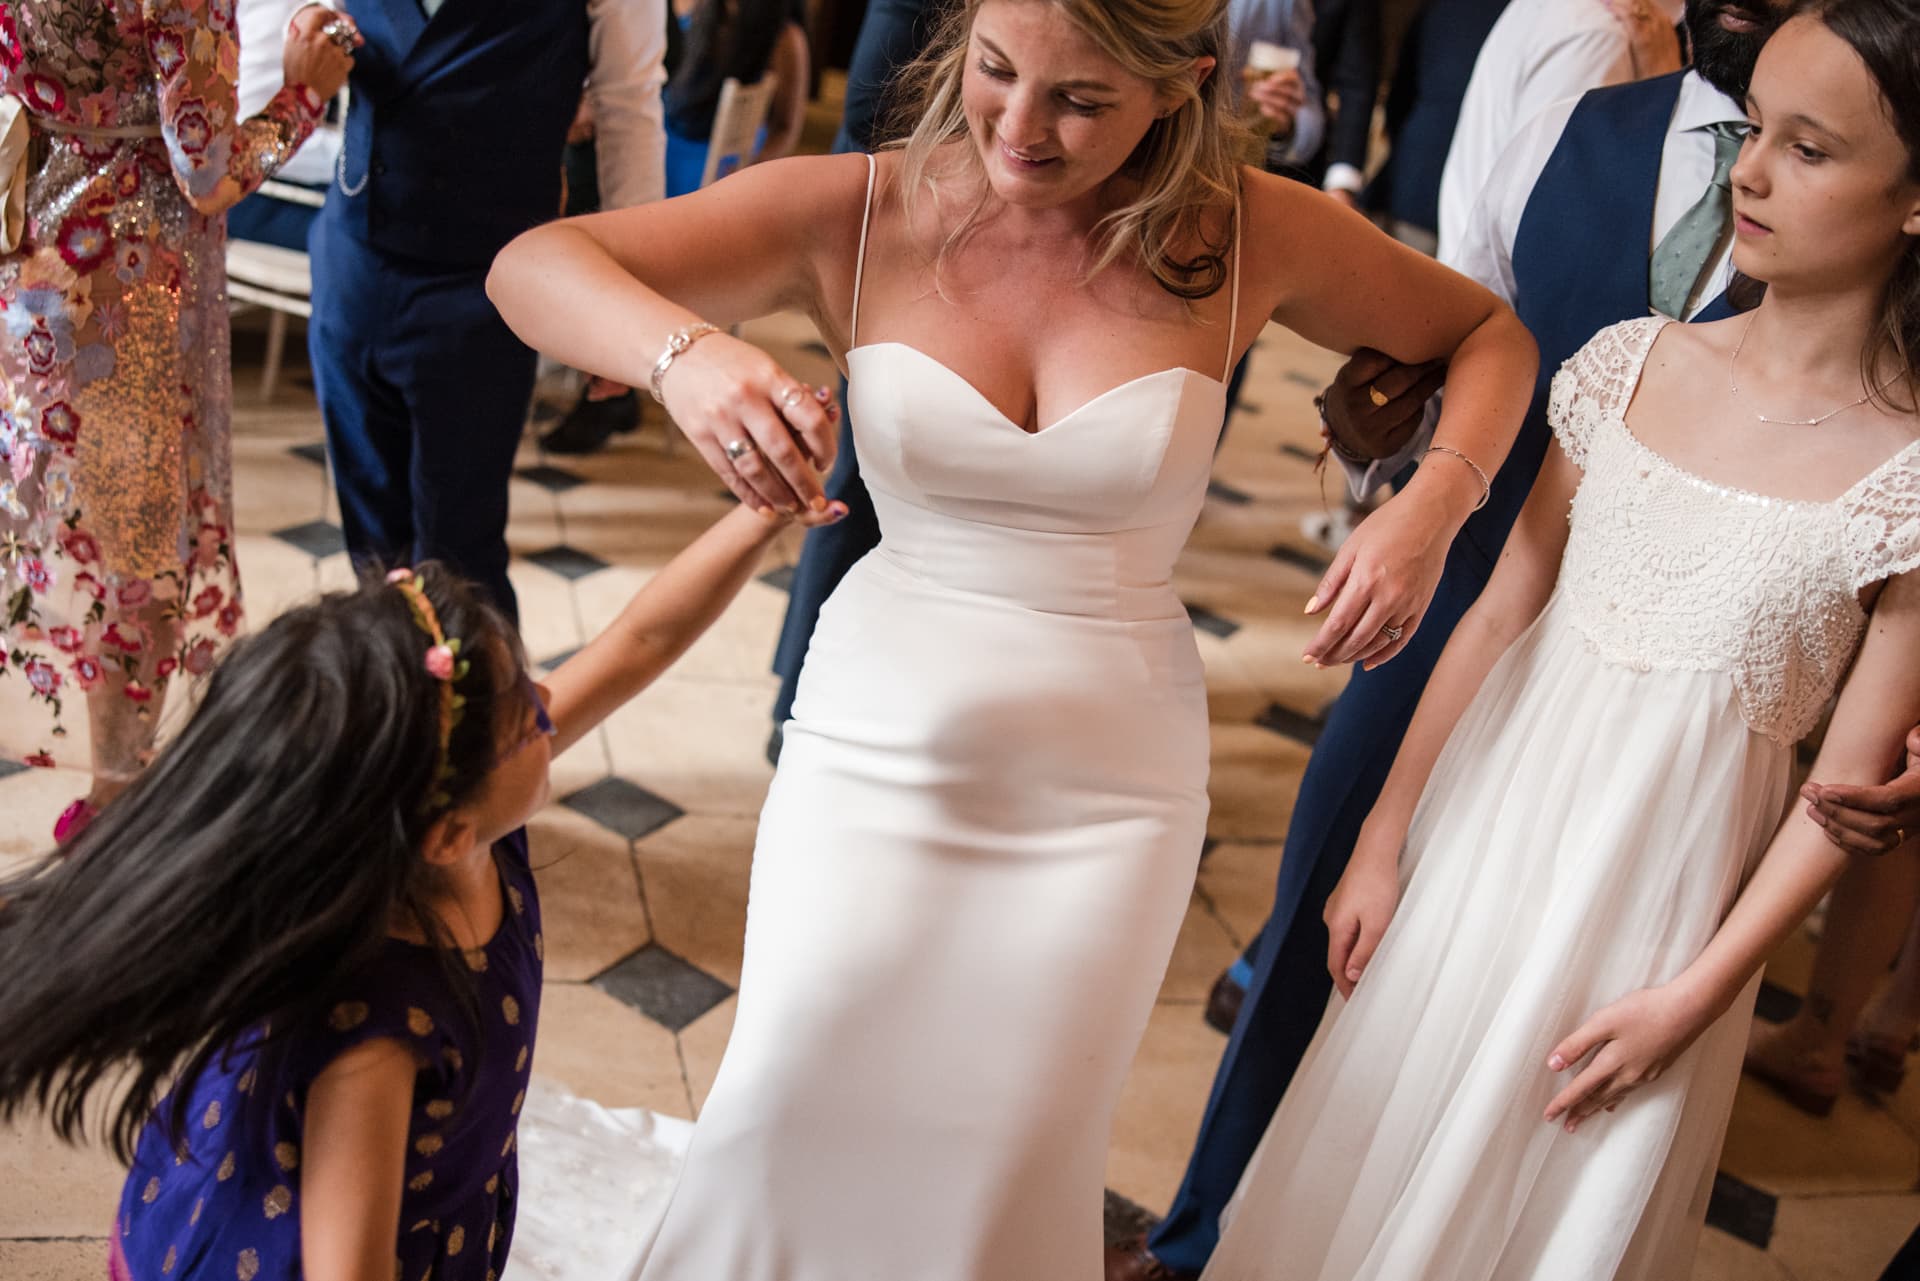 Bride dancing with young girl and bridesmaid